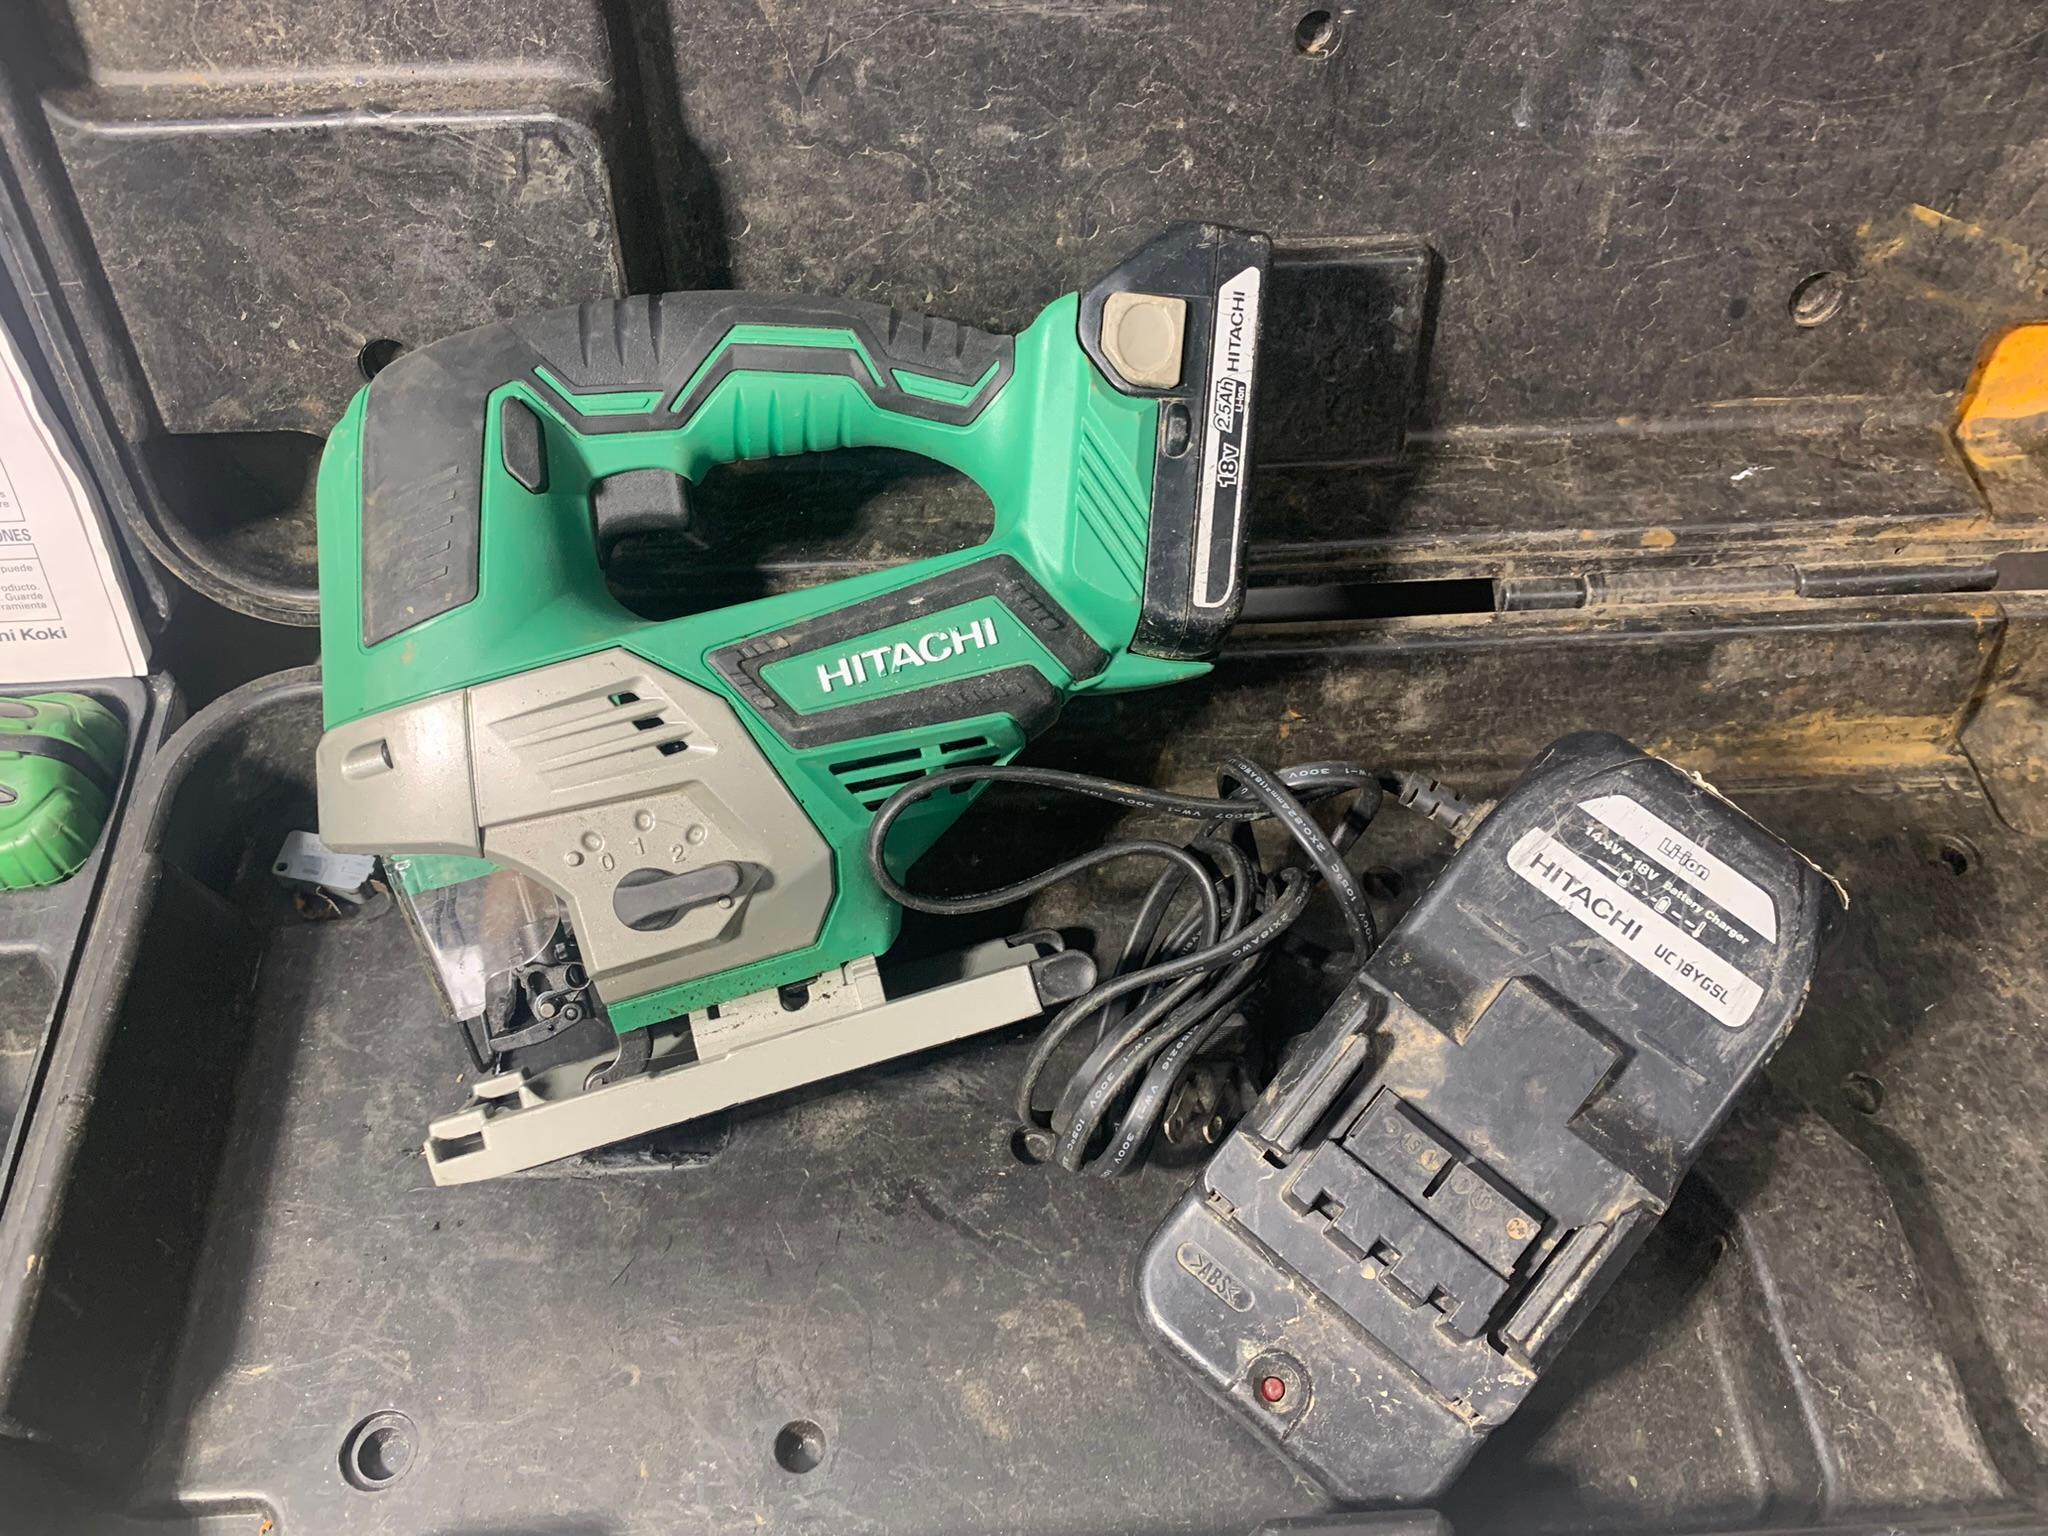 Hitachi Jig Saw with Battery & Charger and Hitachi Drill, Battery, Charger & Flashlight